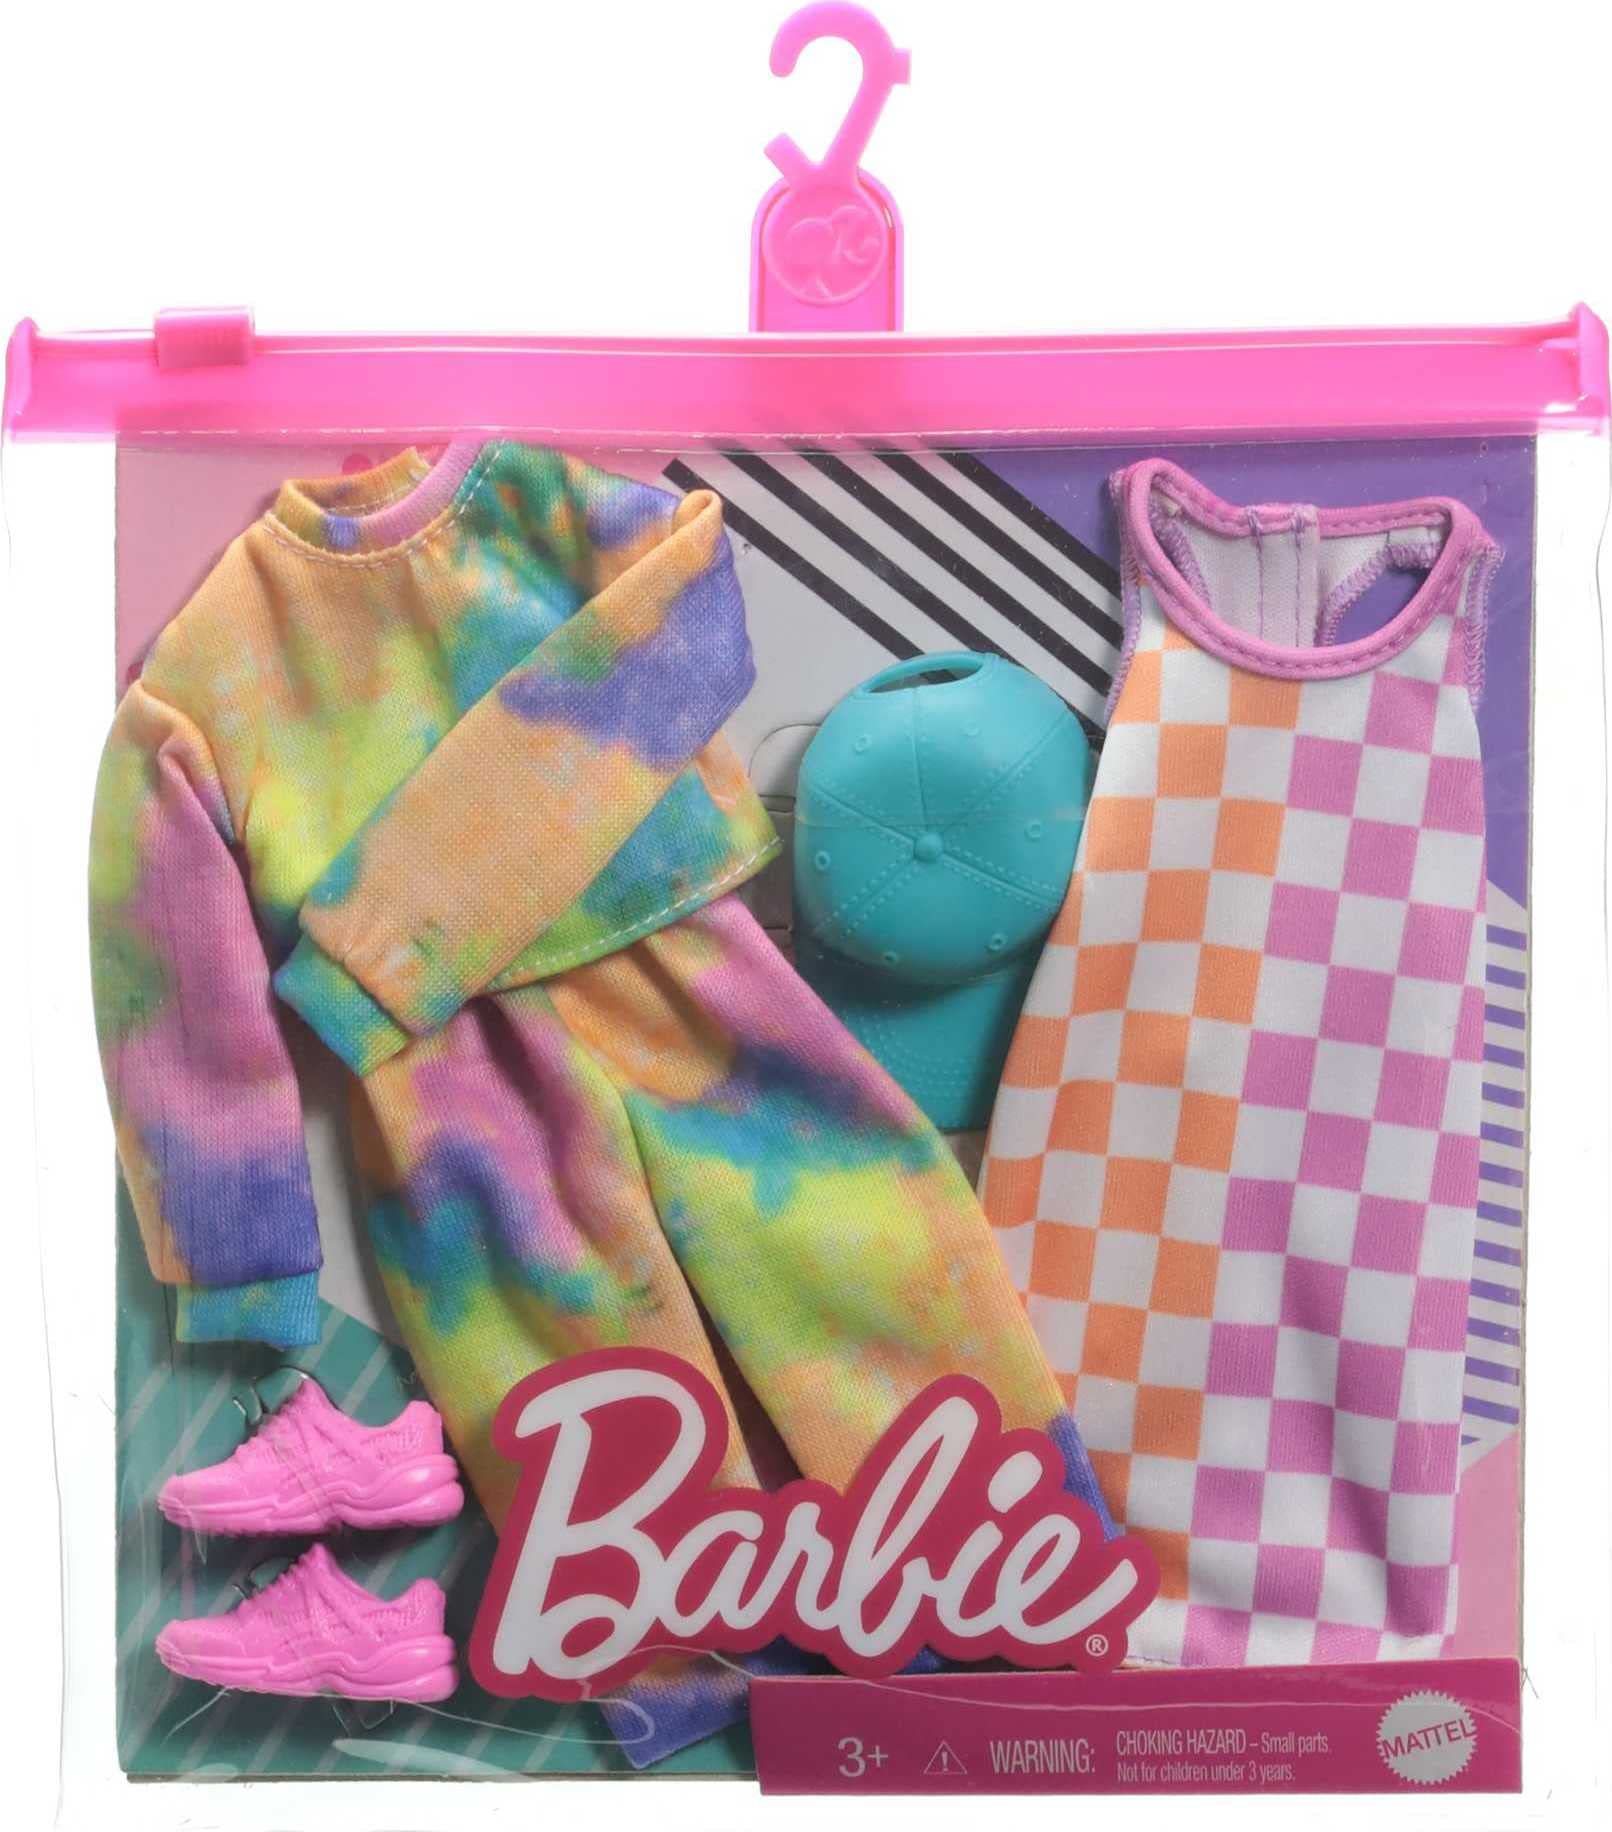 Barbie Fashions 2-Pack Clothing Set, 2 Outfits Doll Include Tie-Dye Joggers & Sweatshirt, Checked Dress, Blue Cap & Pink Sneakers, Gift for Kids 3 to 8 Years Old